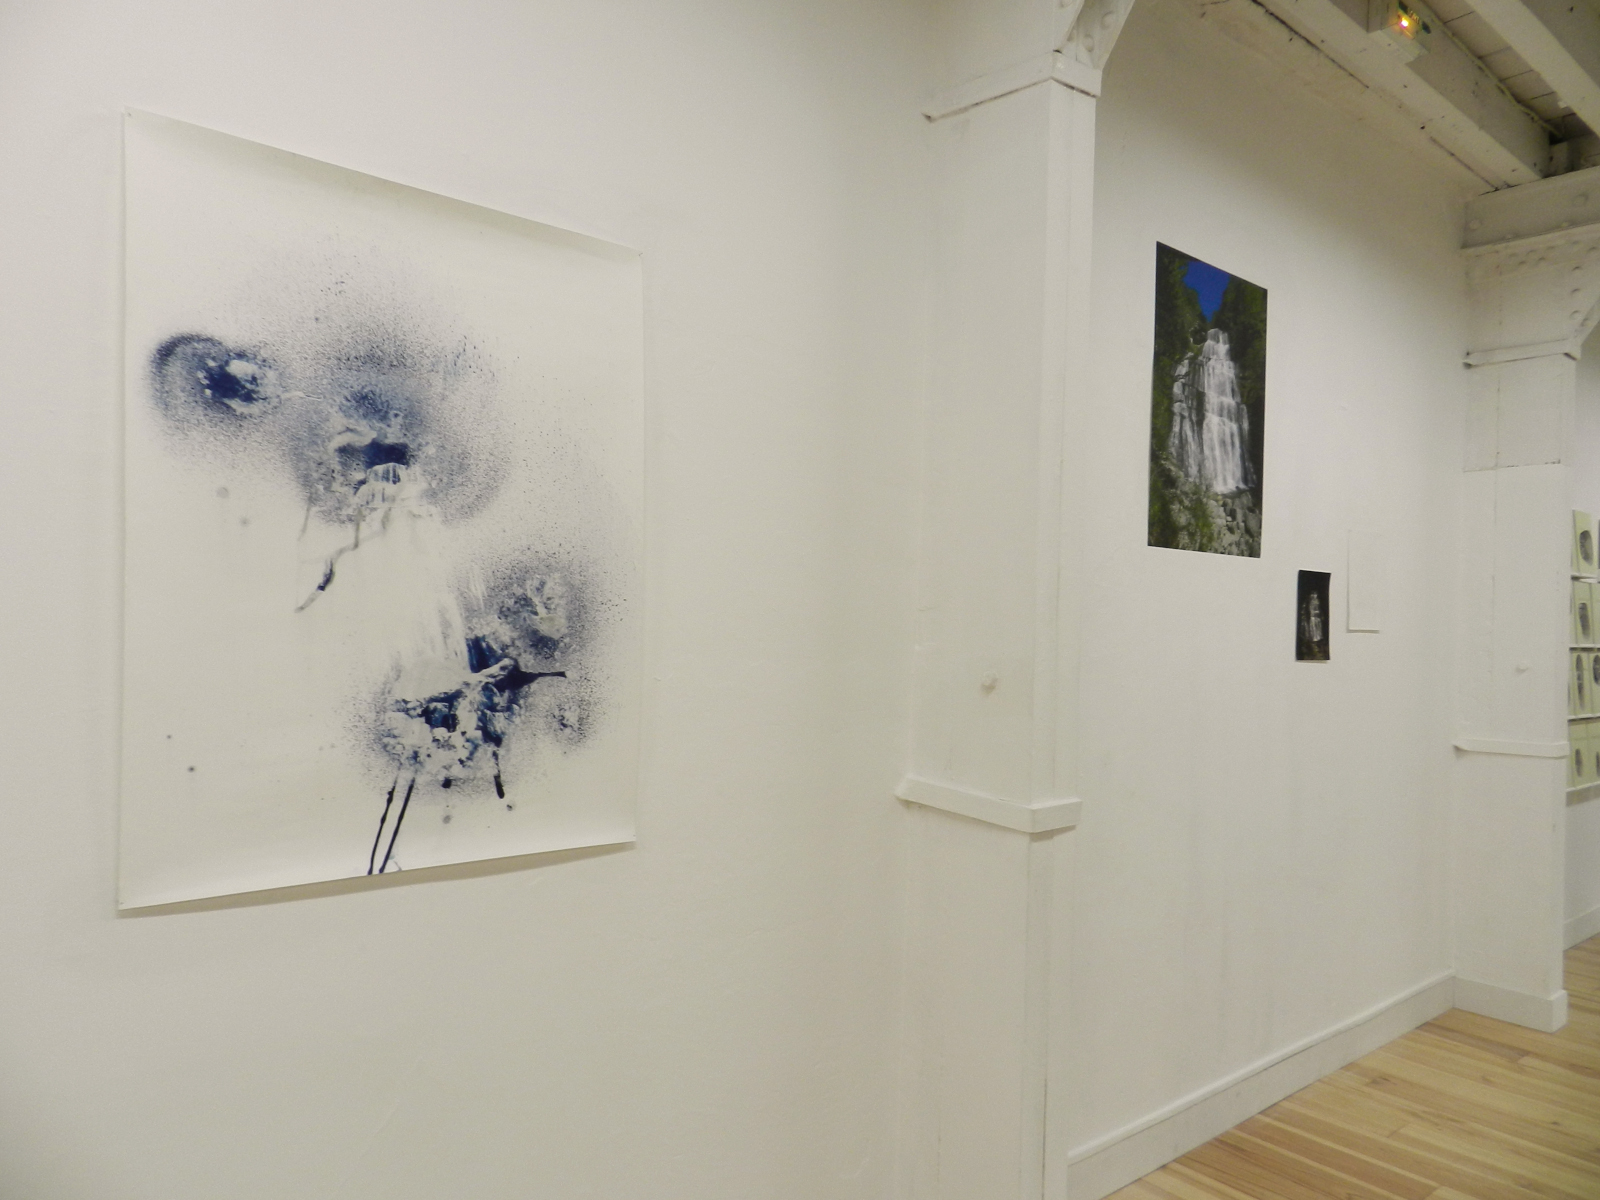 View of the pieces from the Cascades series that coexist in the exhibition